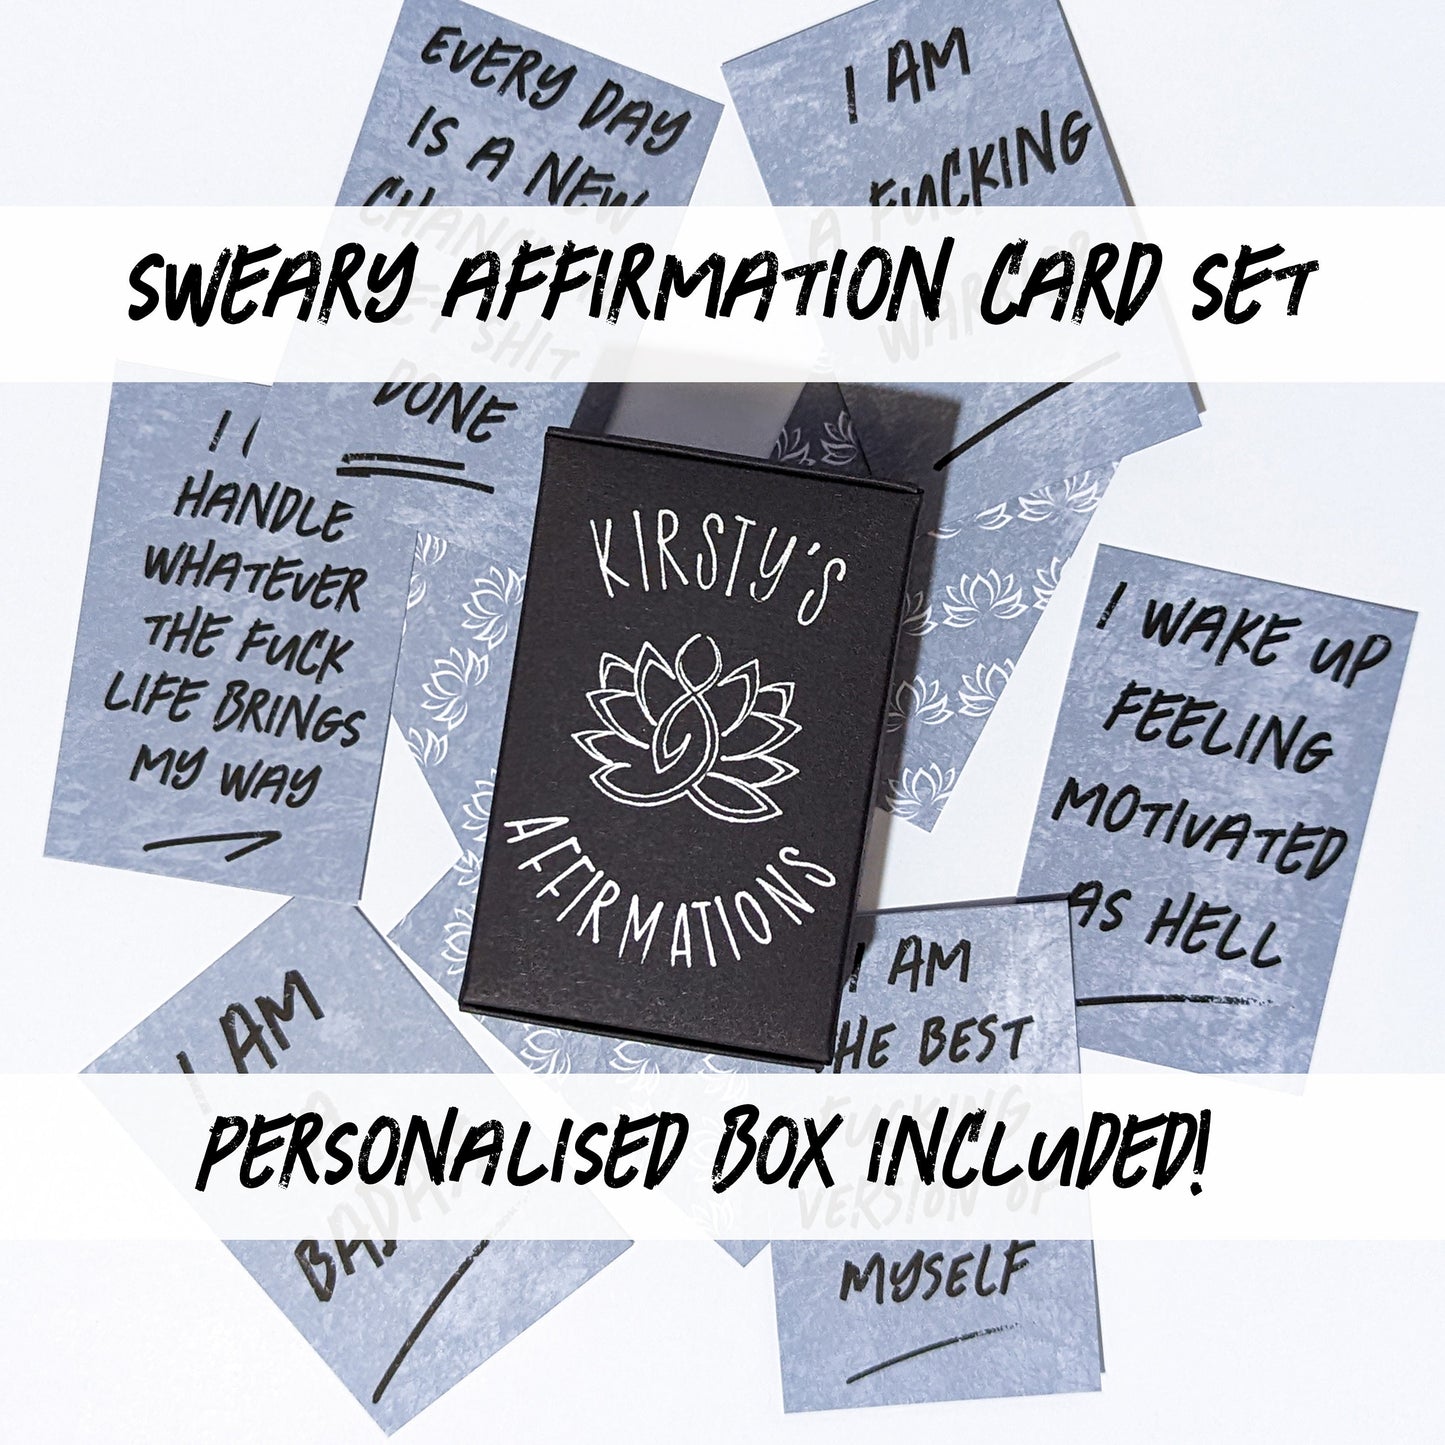 The Sweary Affirmation Shop - Custom Sweary Affirmation Deck | Funny Encouragement Cards